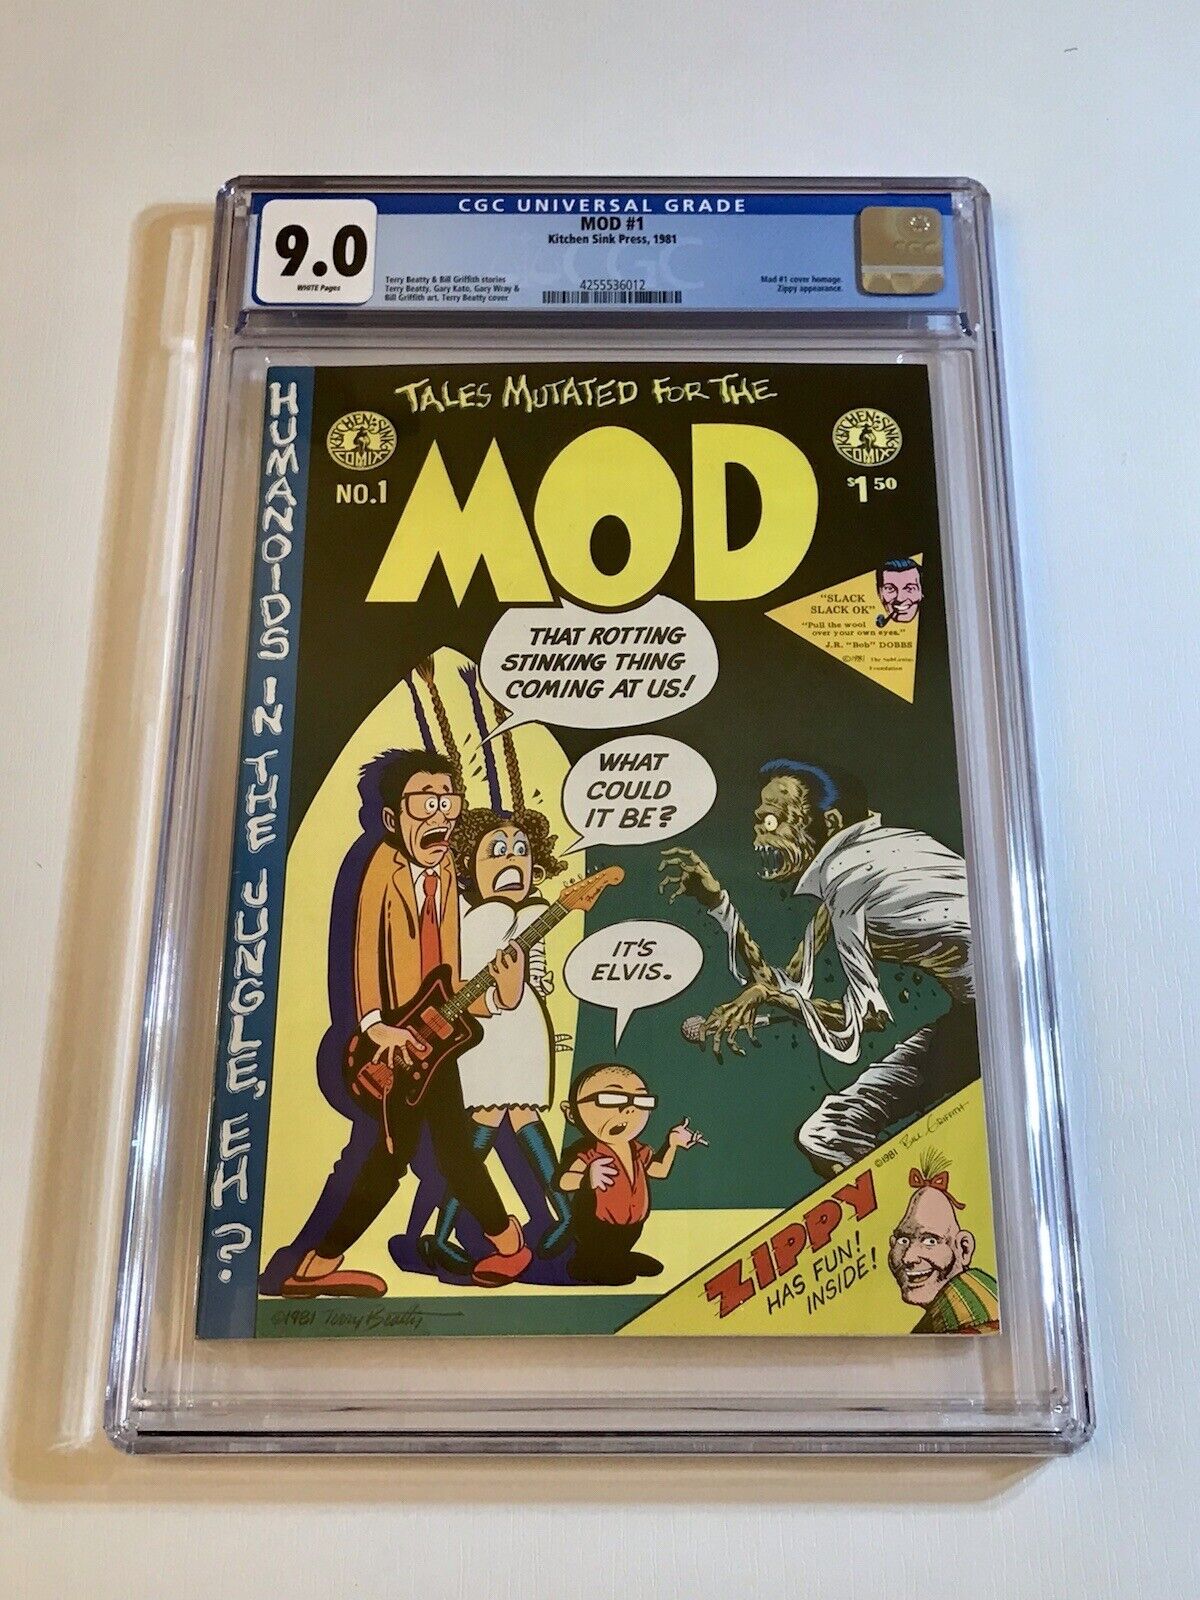 1981 KITCHEN SINK TALES MUTATED FOR THE MOD #1 MAD #1 COVER HOMAGE EC CGC 9.0 WP